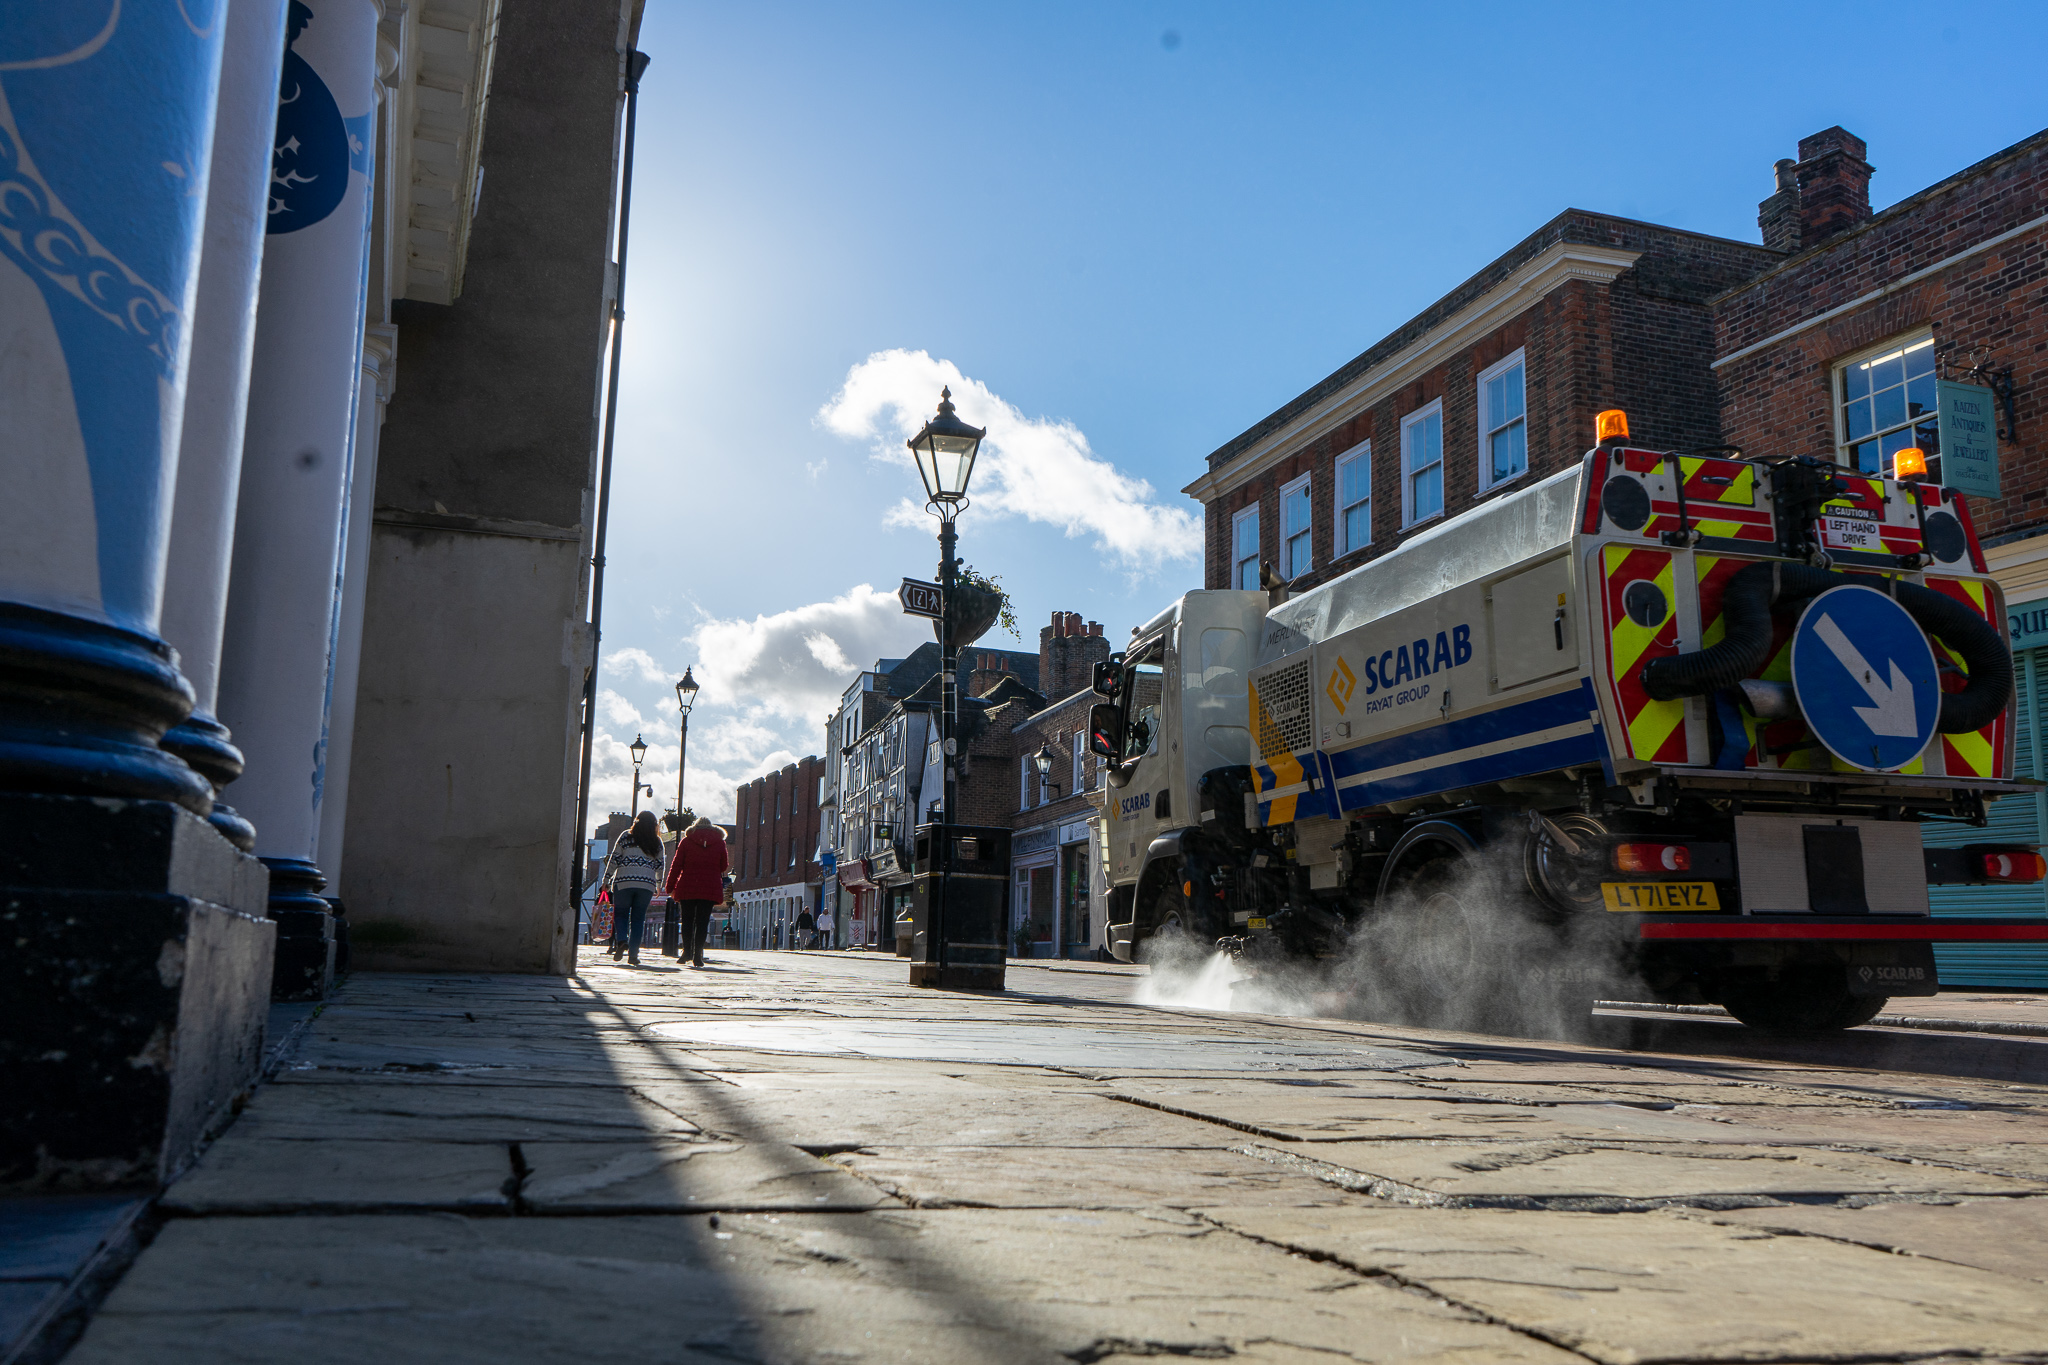 The Merlin 55 sweeping Rochester high street.